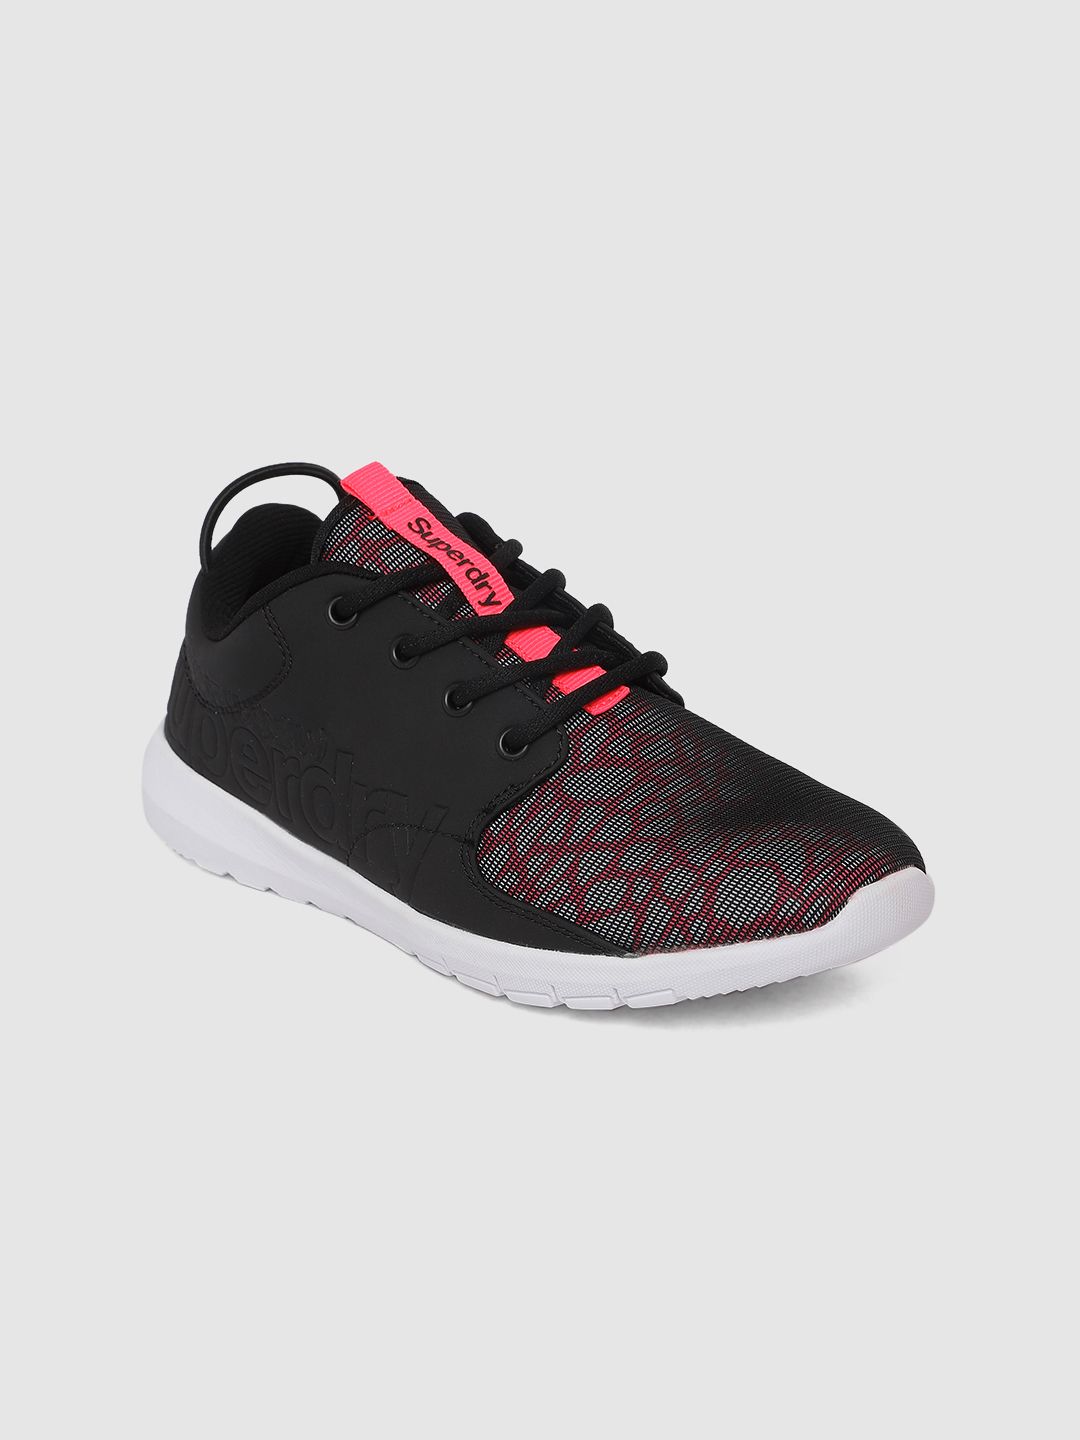 Superdry Women Black Scuba Sport Running Shoes Price in India